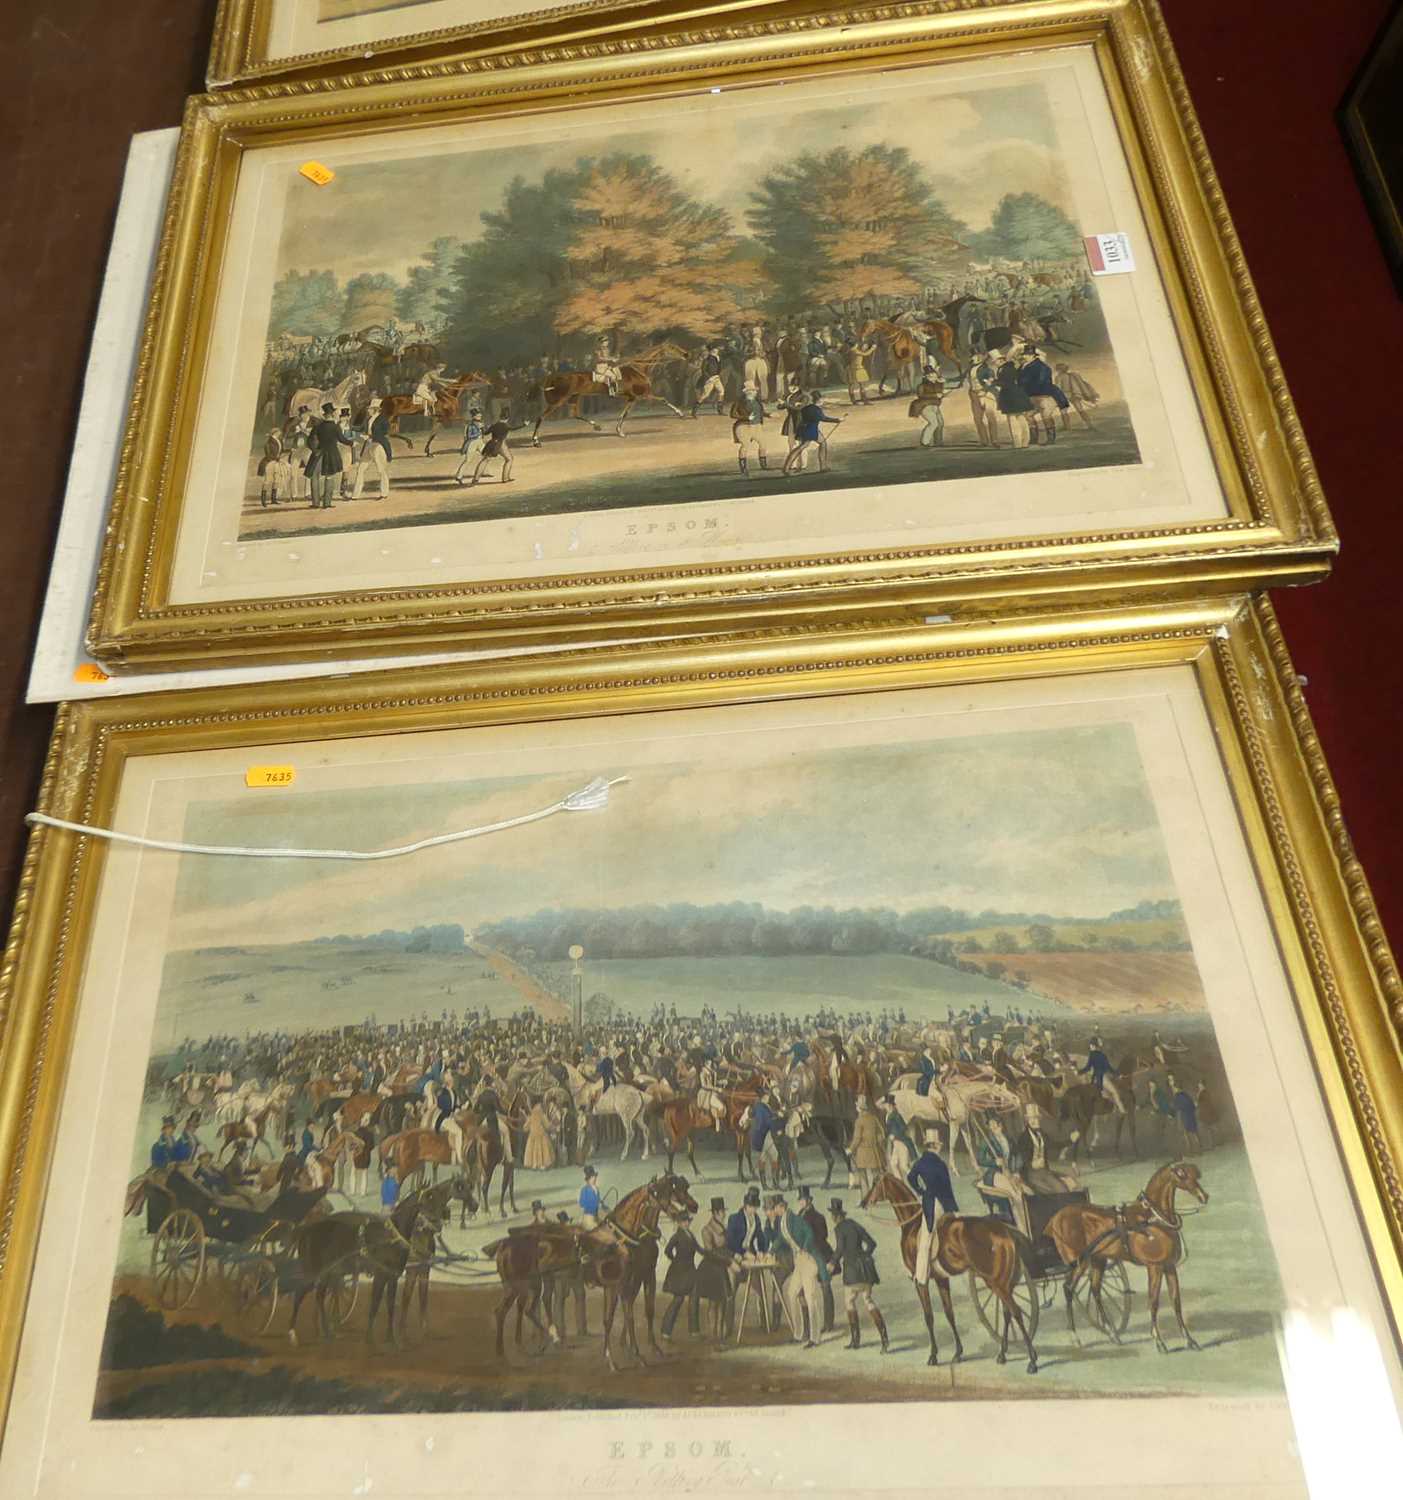 After James Pollard - Epsom, a set of six sporting engravings by Charles Hunt, published by Ackerman